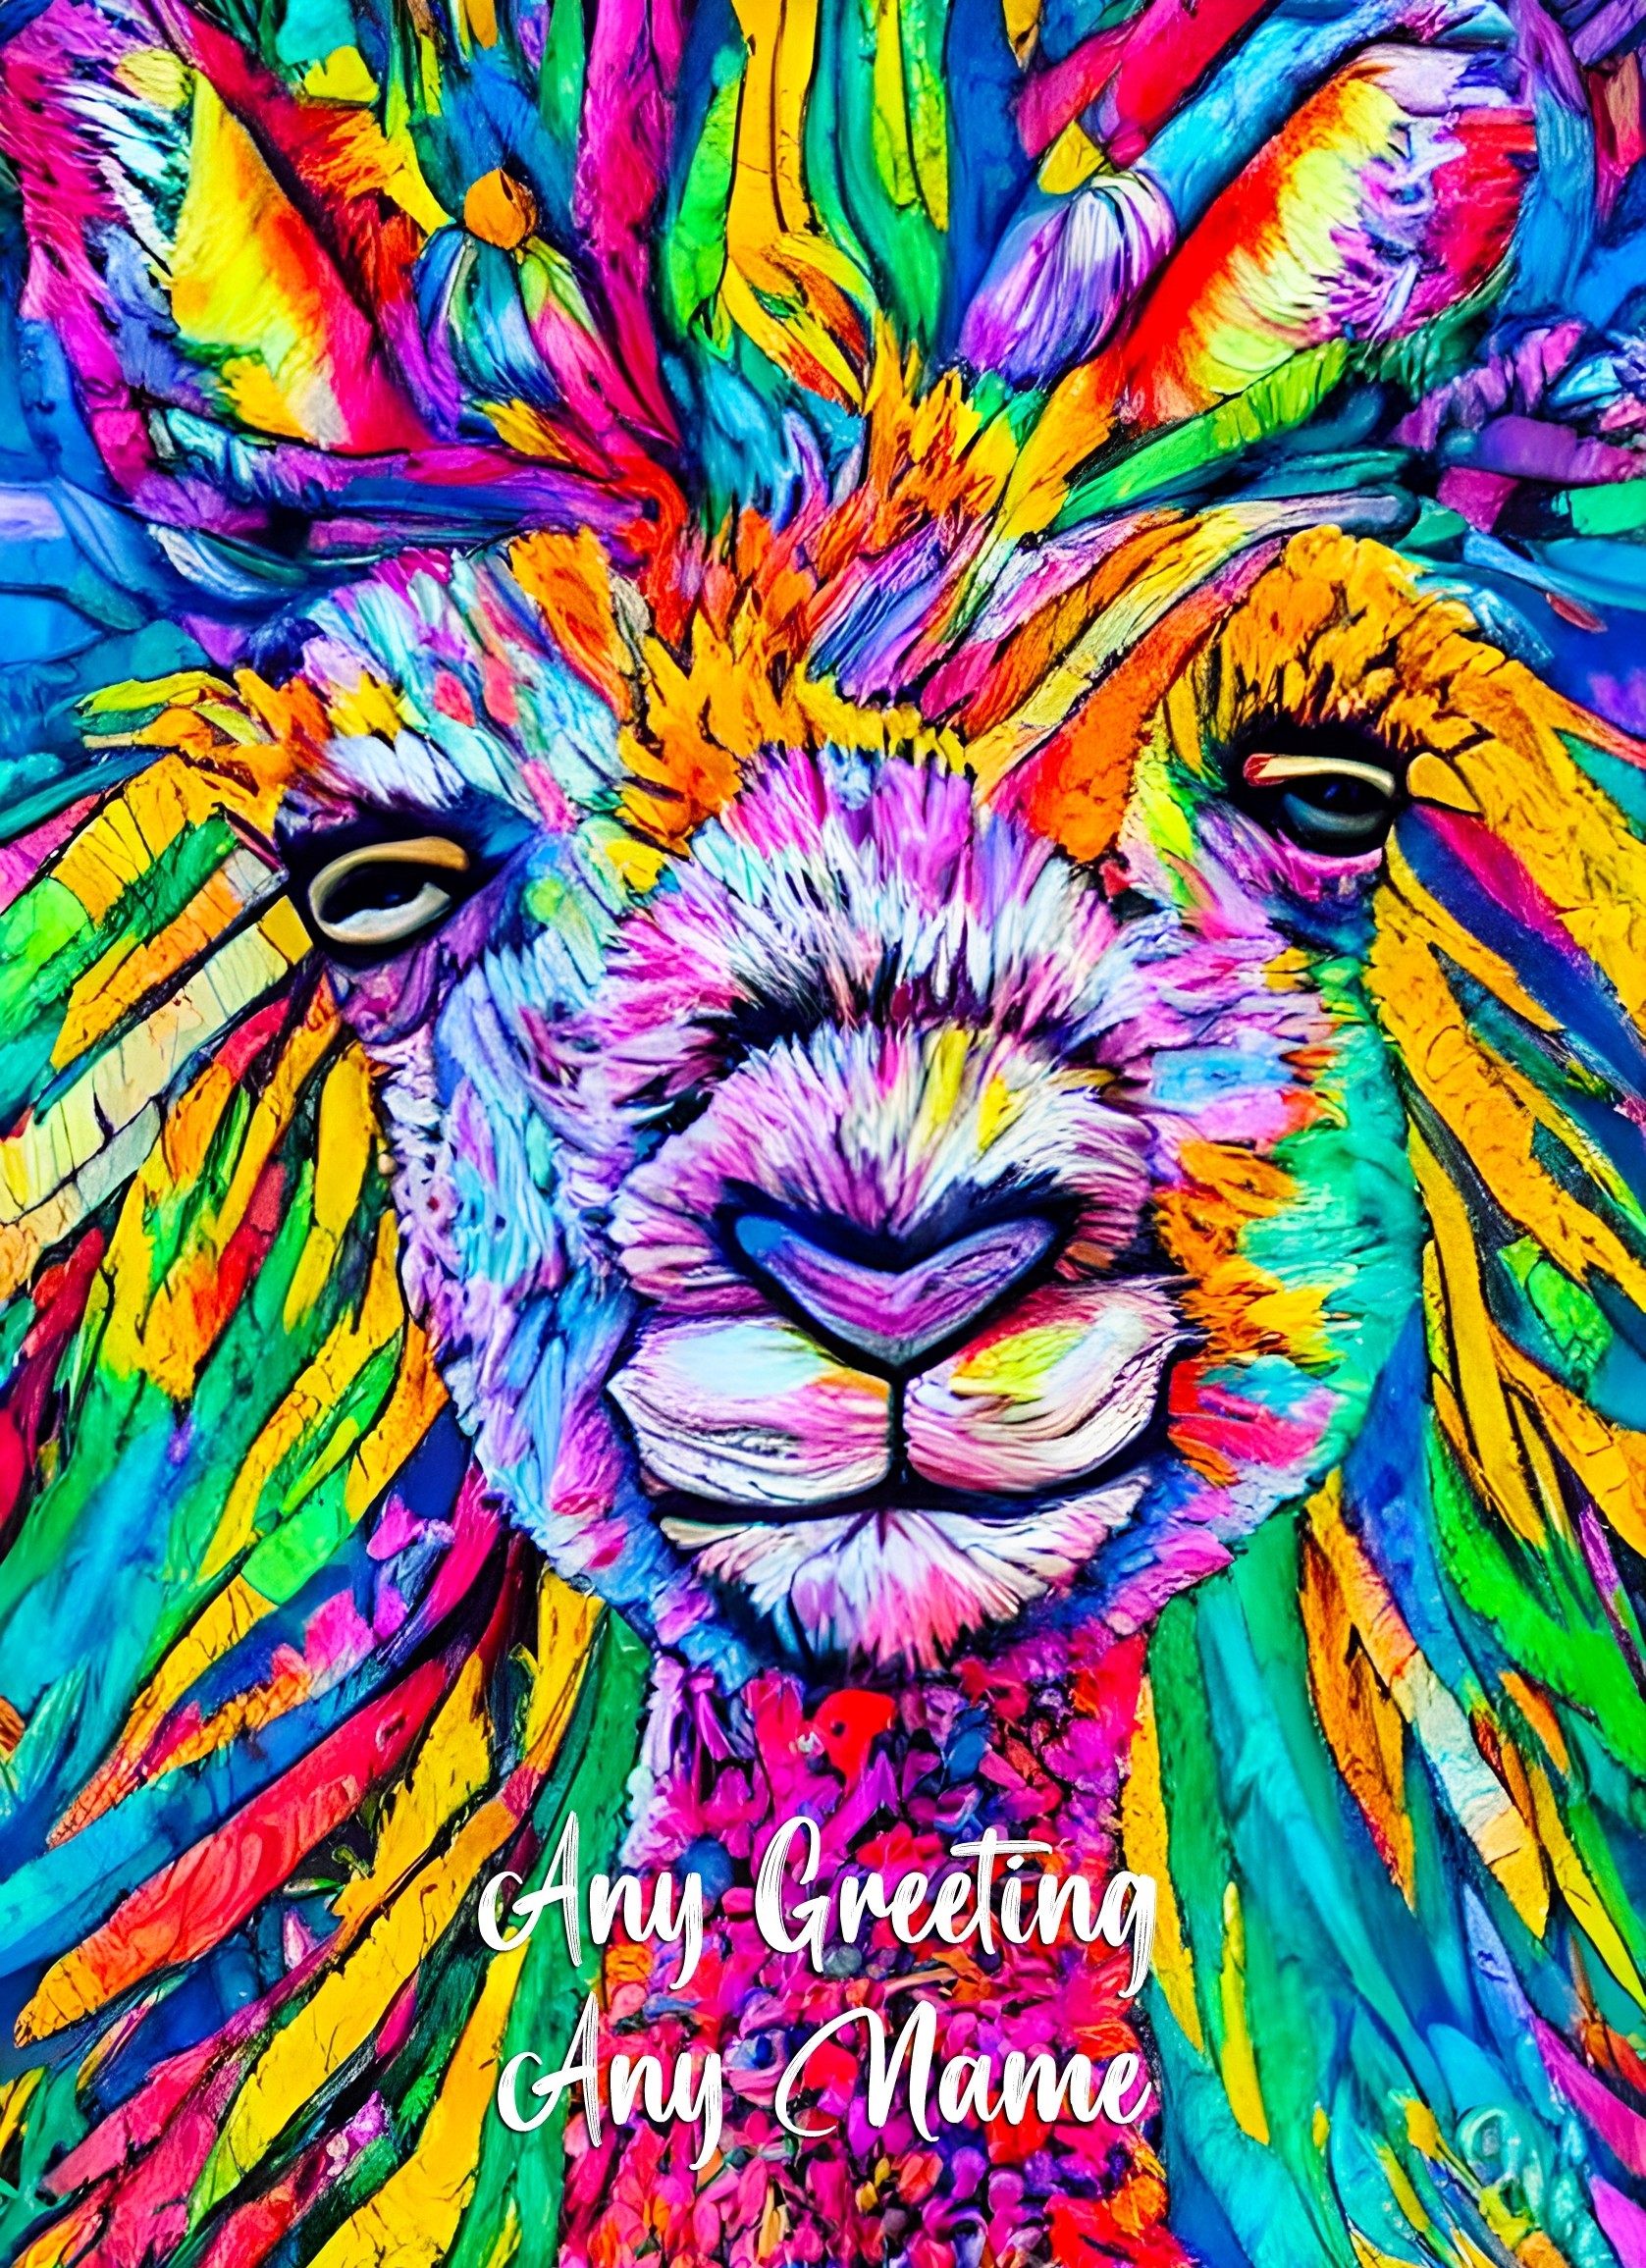 Personalised Alpaca Animal Colourful Abstract Art Greeting Card (Birthday, Fathers Day, Any Occasion)